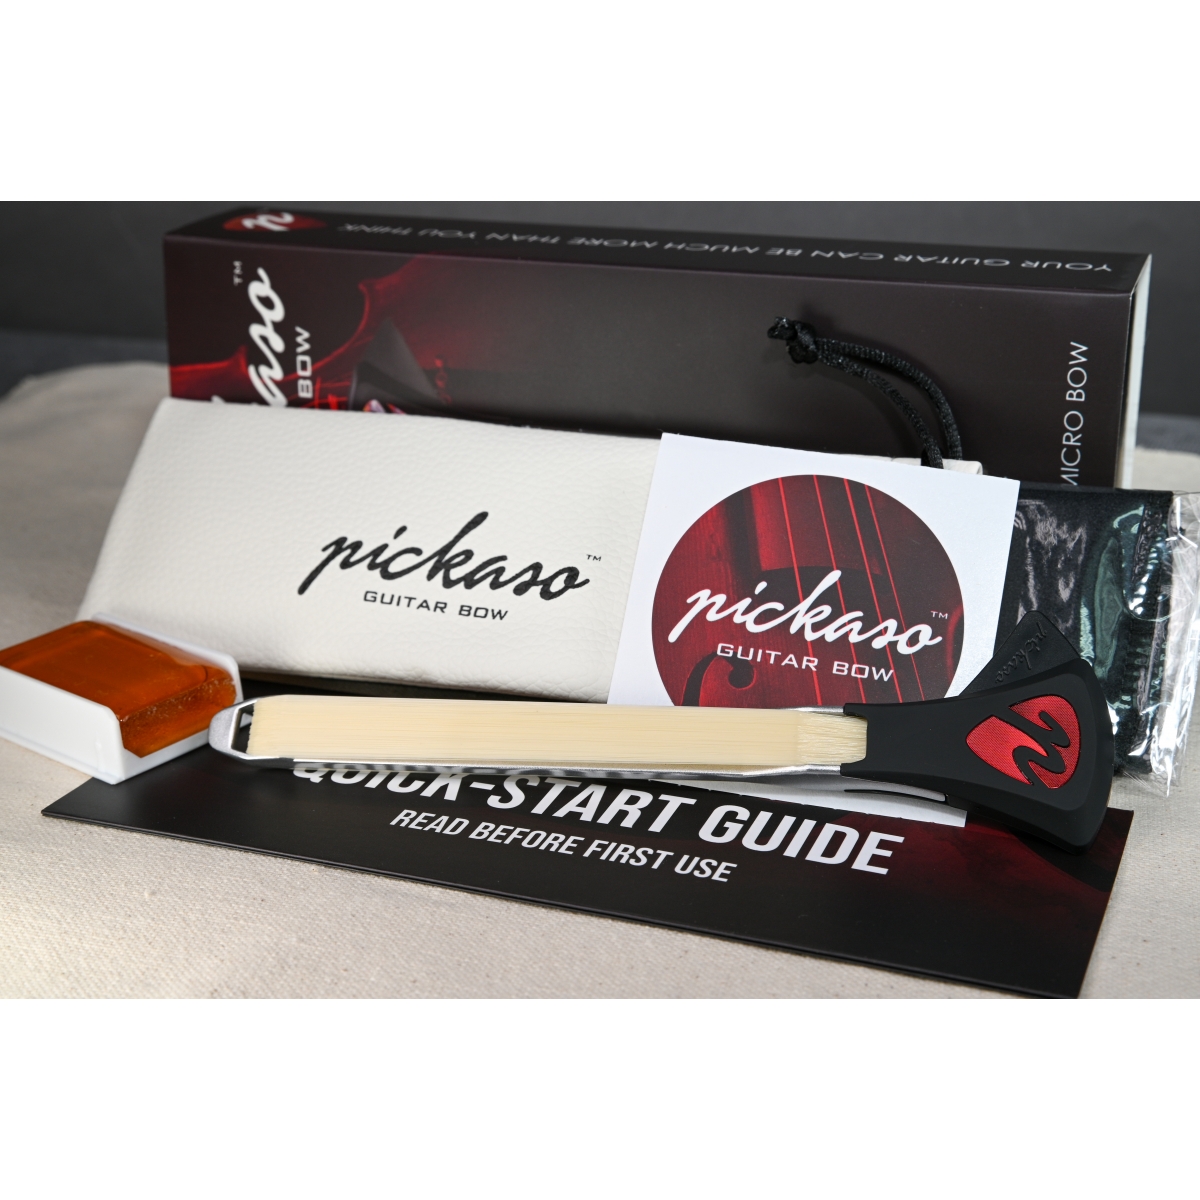 Join thousands of creative musicians and unleash your creativity with our  revolutionary Pickaso bow., By Pickaso Guitar Bow